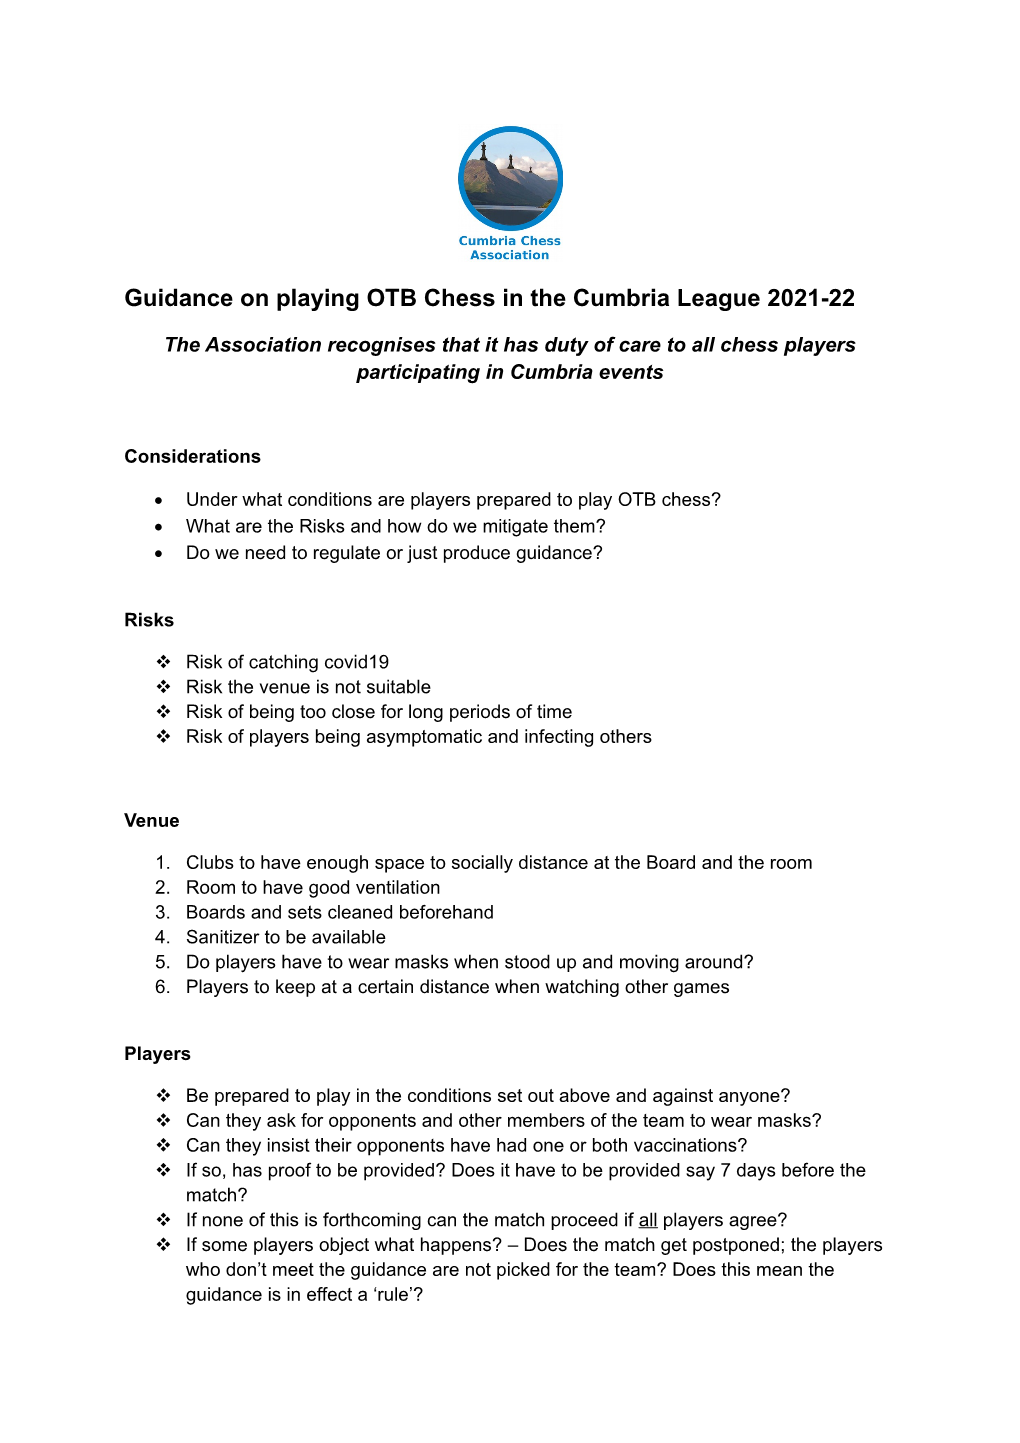 Guidance on Playing OTB Chess in the Cumbria League 2021-22